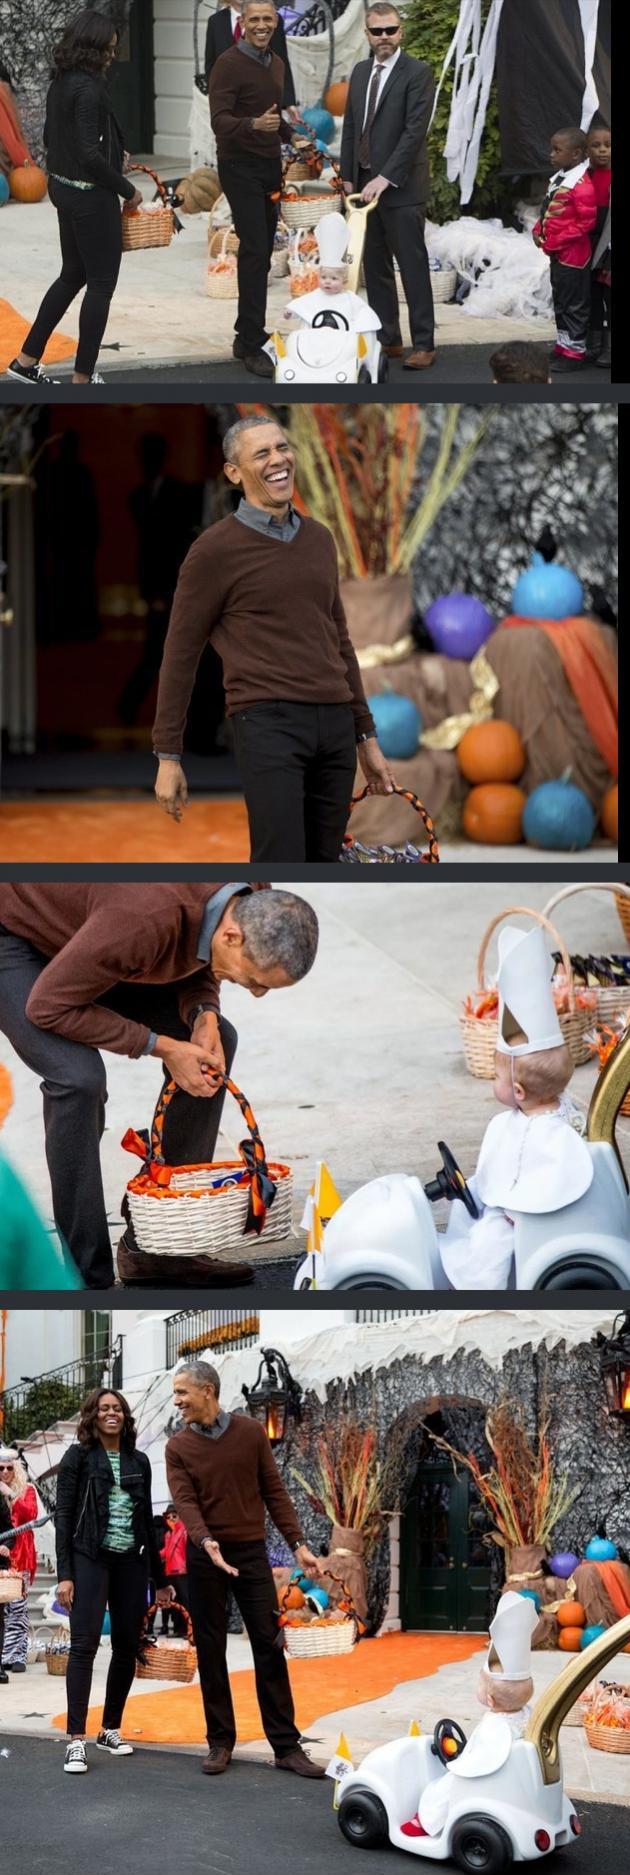 Obama%26%238217%3Bs+endearing+reaction+to+a+baby+dressed+as+a+pope